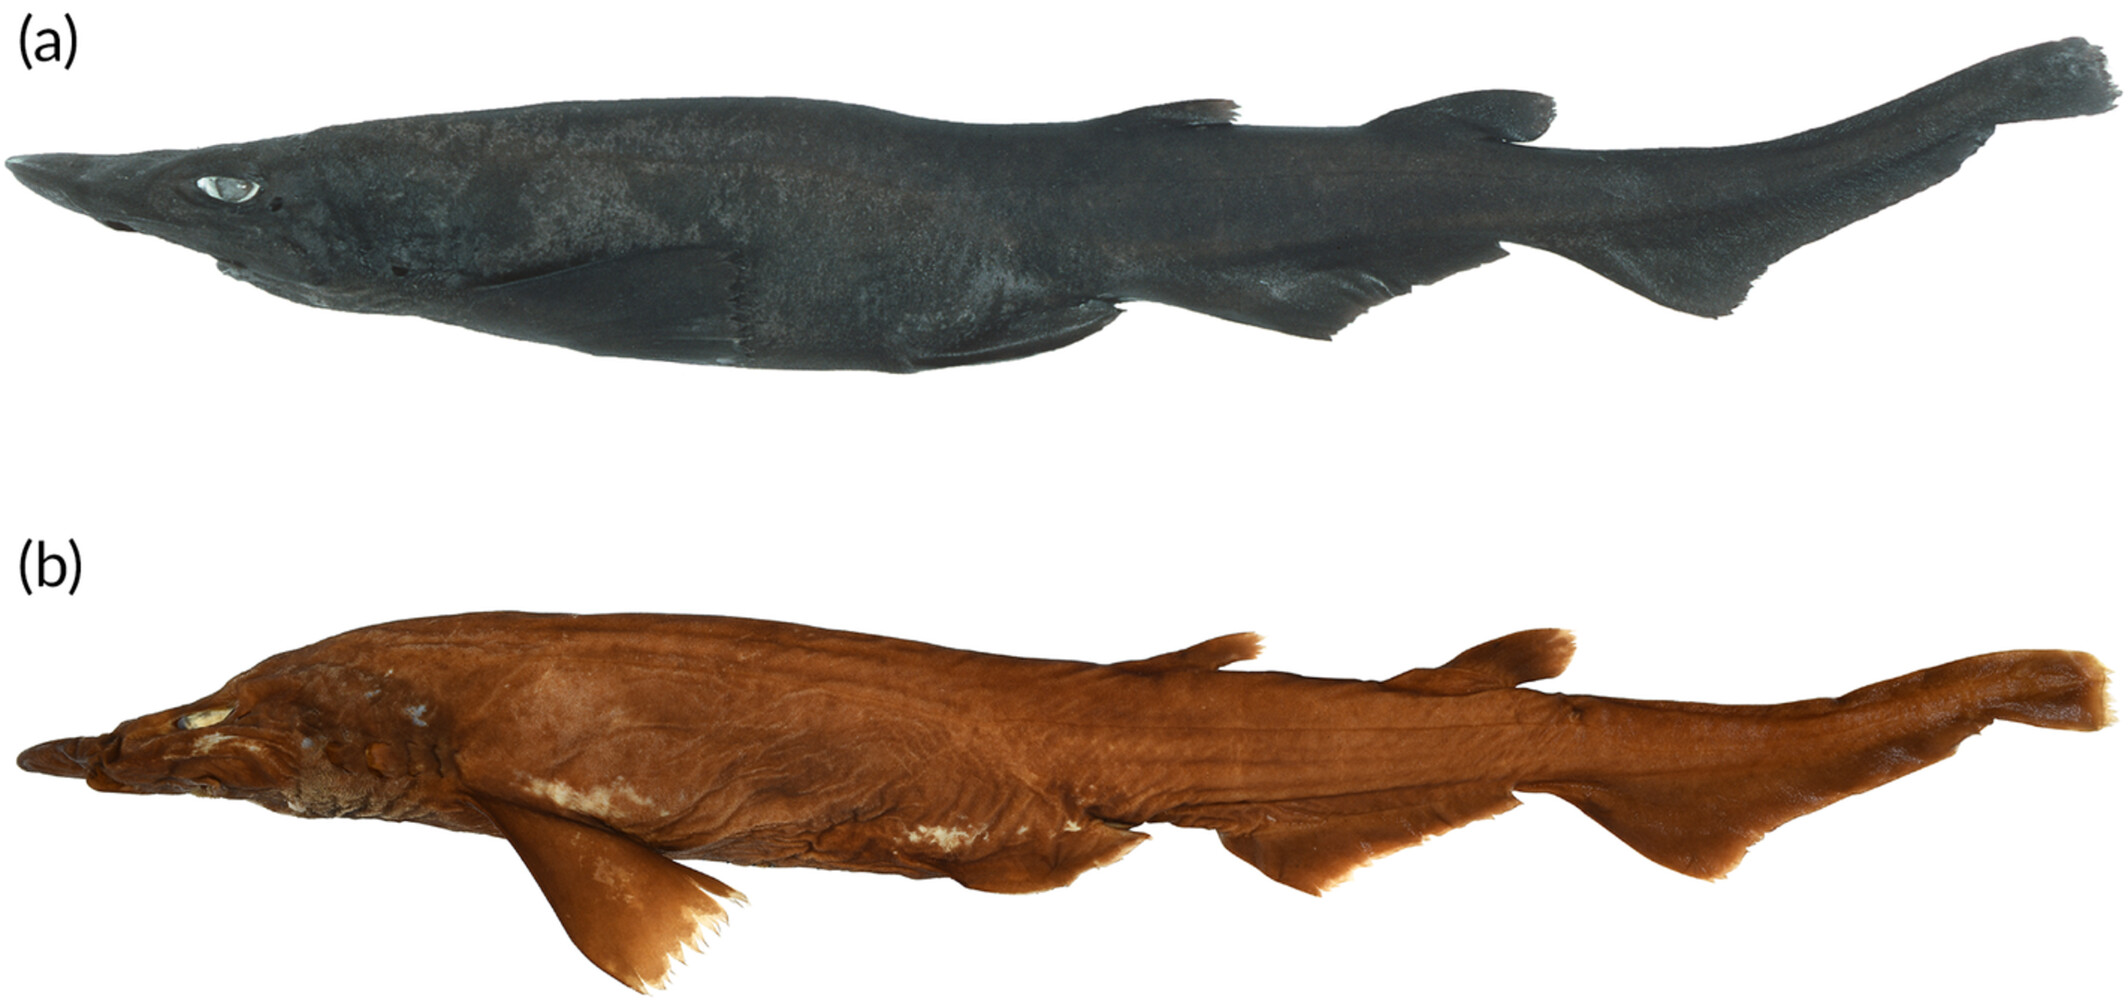 Side view of the new species of catshark that was identified by its unusual egg case.